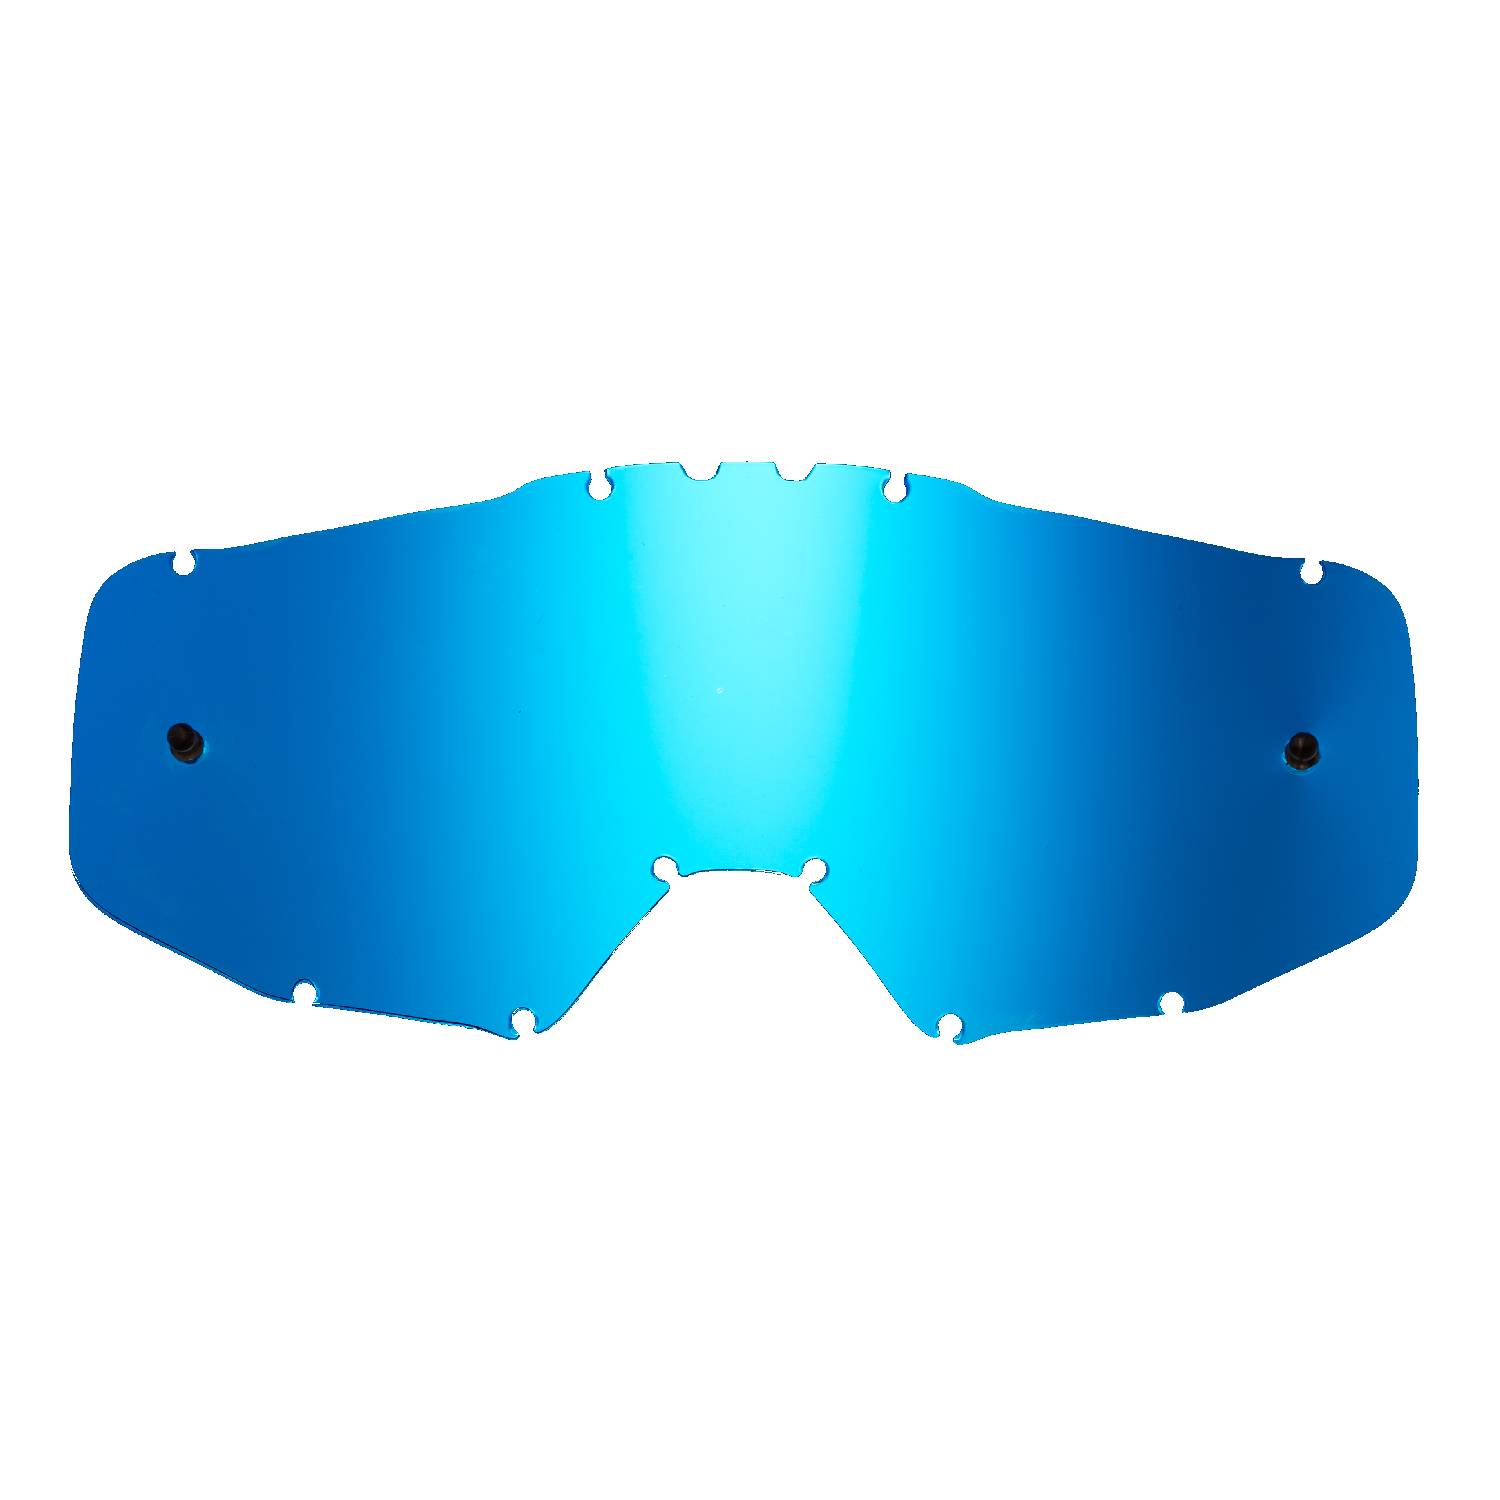 blue-toned mirrored replacement lenses for goggles compatible for Just1 Iris / Vitro goggle